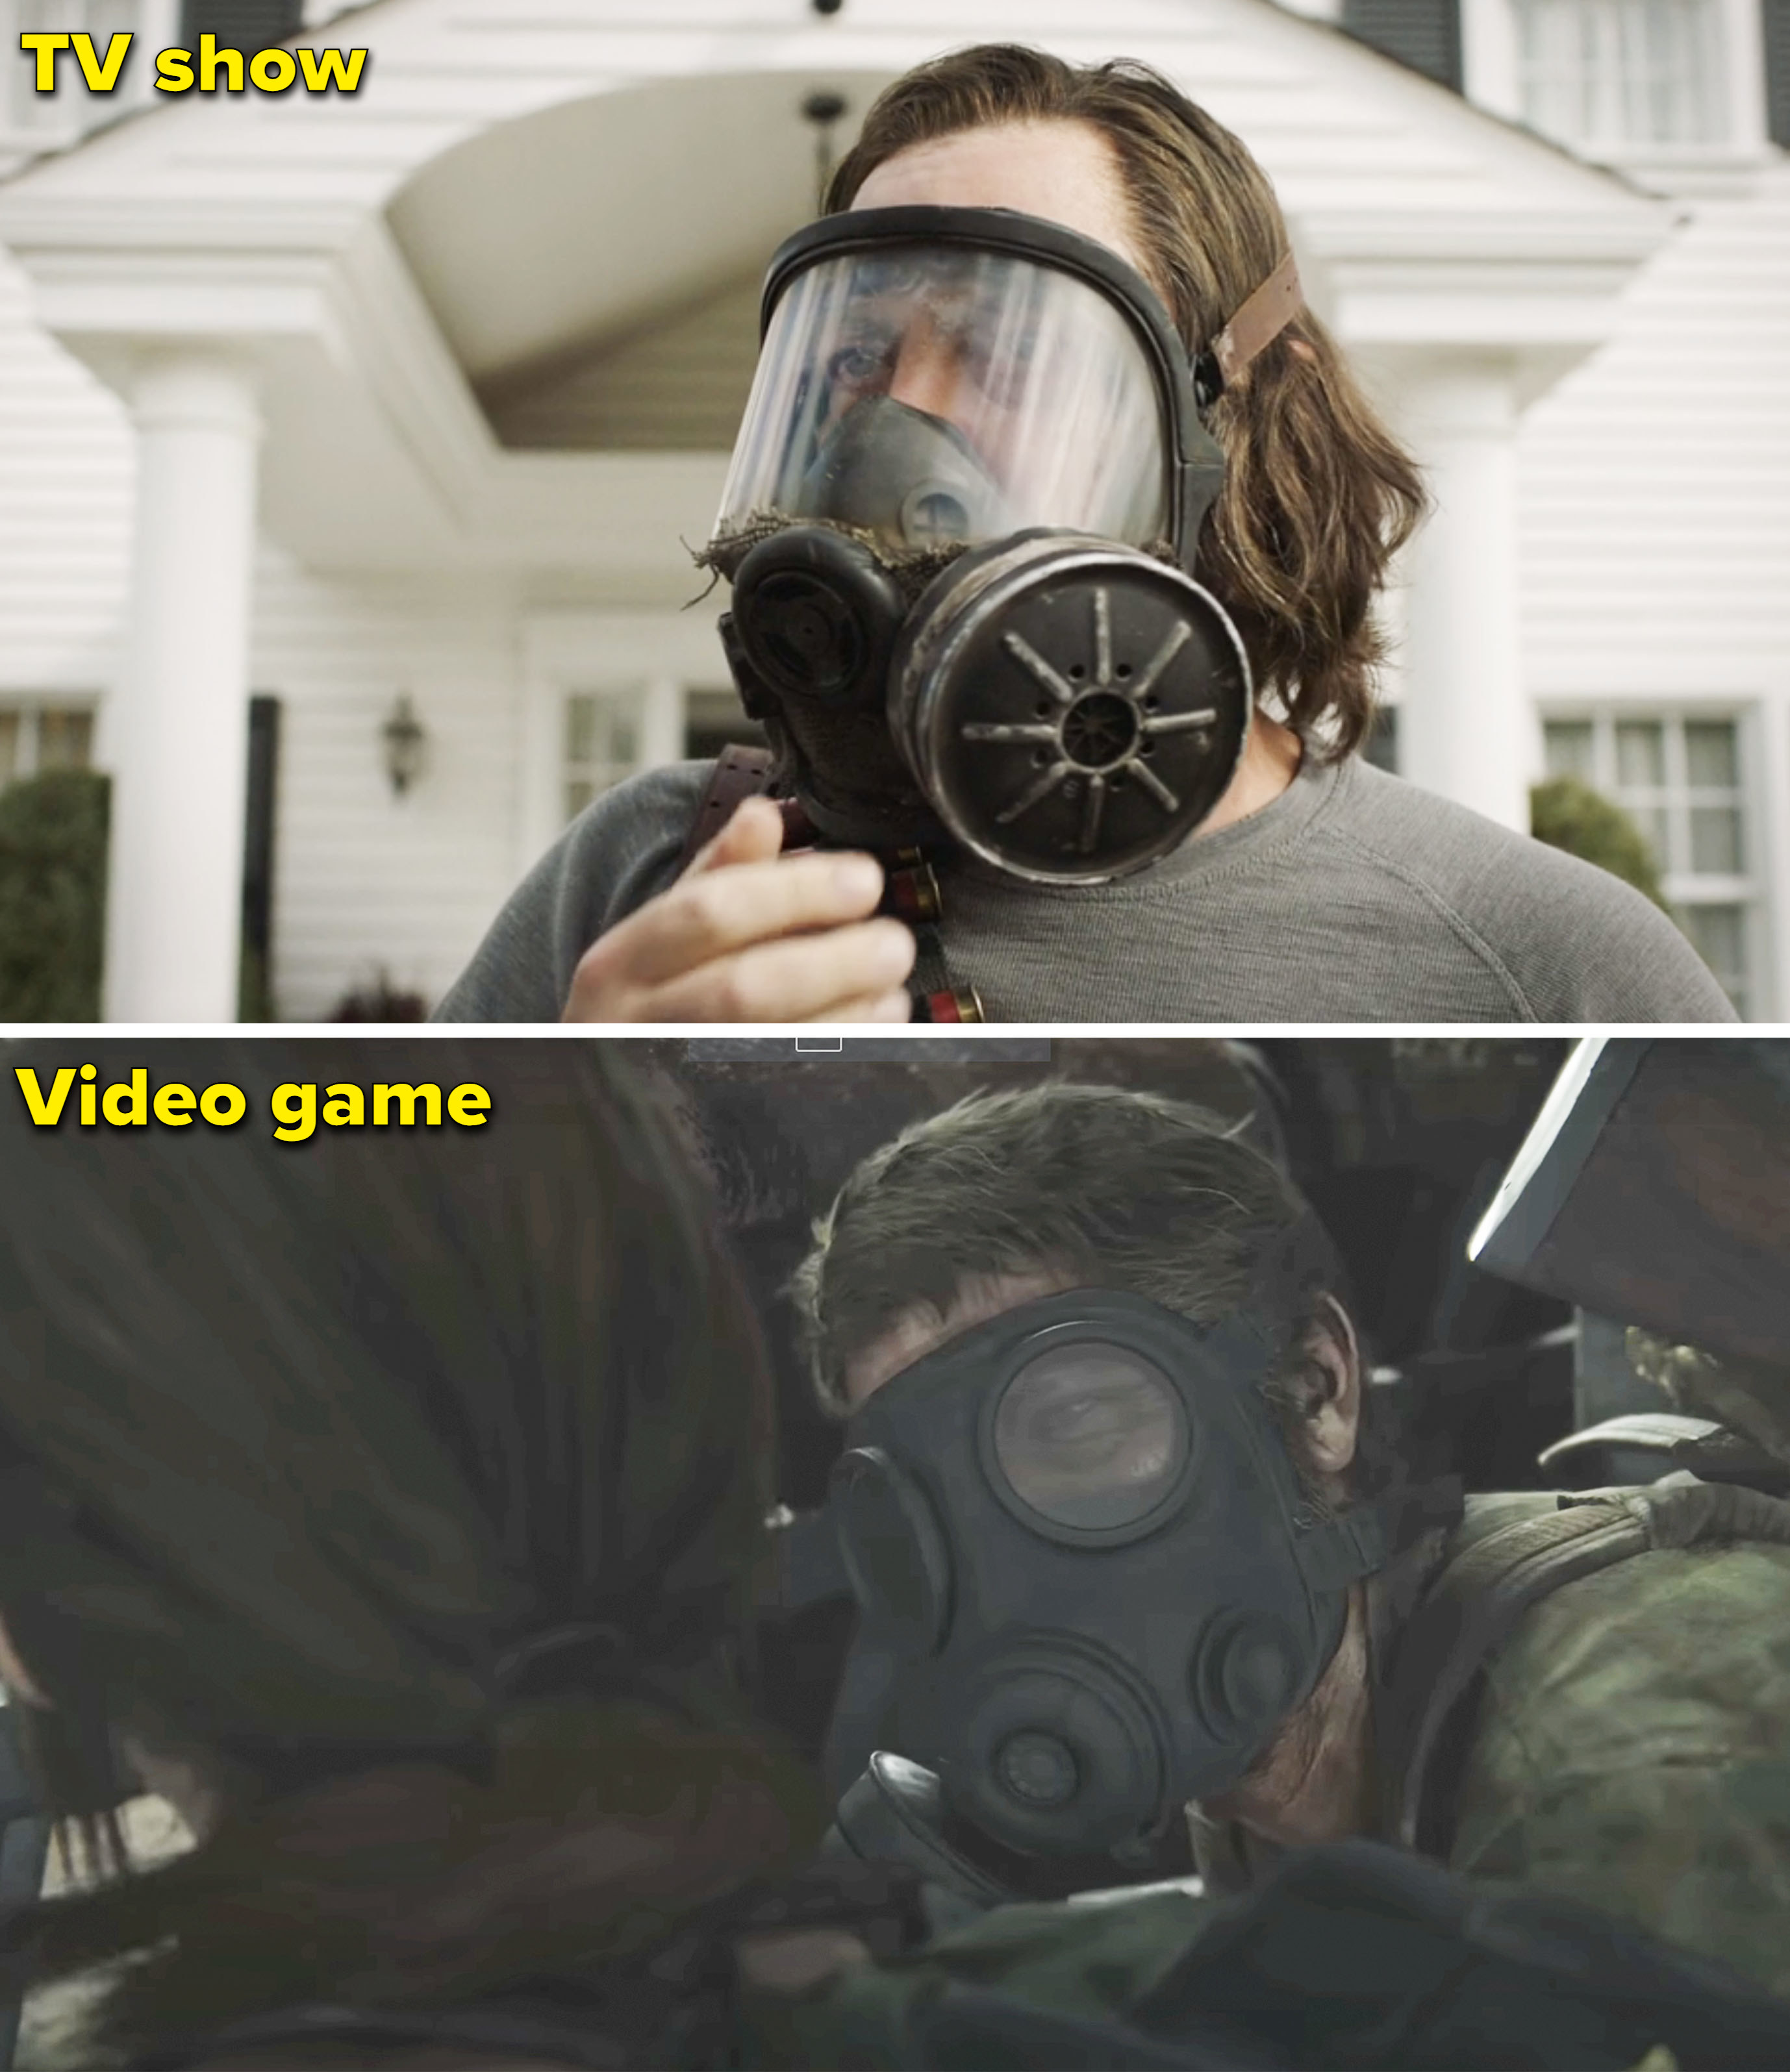 Bill in a gas mask vs Joel in the game